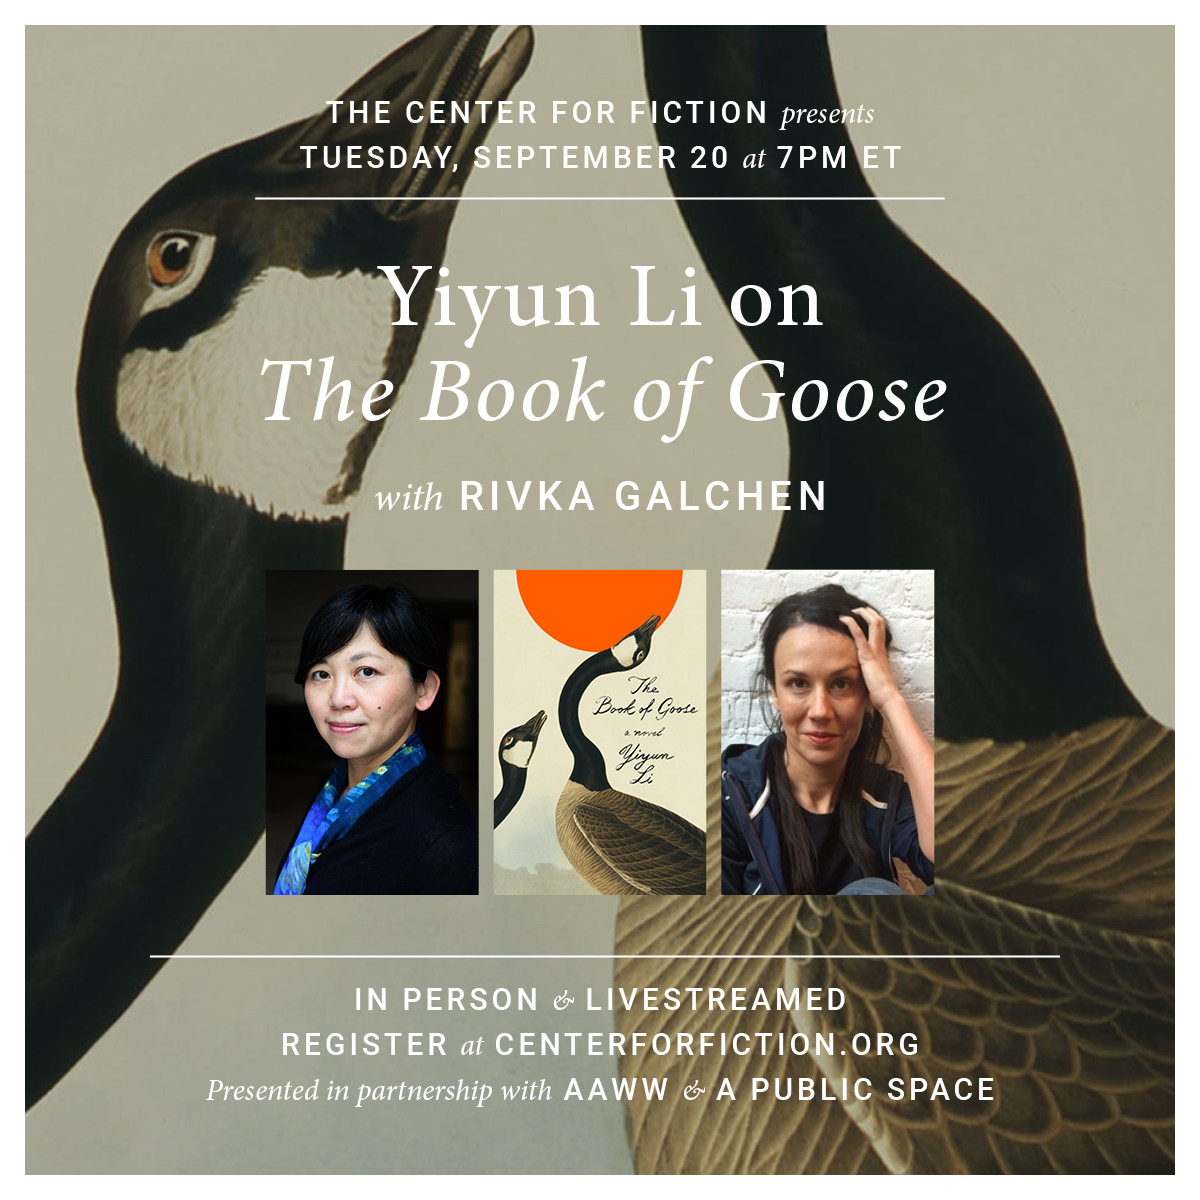 [LIVE] The Center for Fiction Presents: Yiyun Li on The Book of Goose with Rivka Galchen in Partnership with AAWW and A Public Space